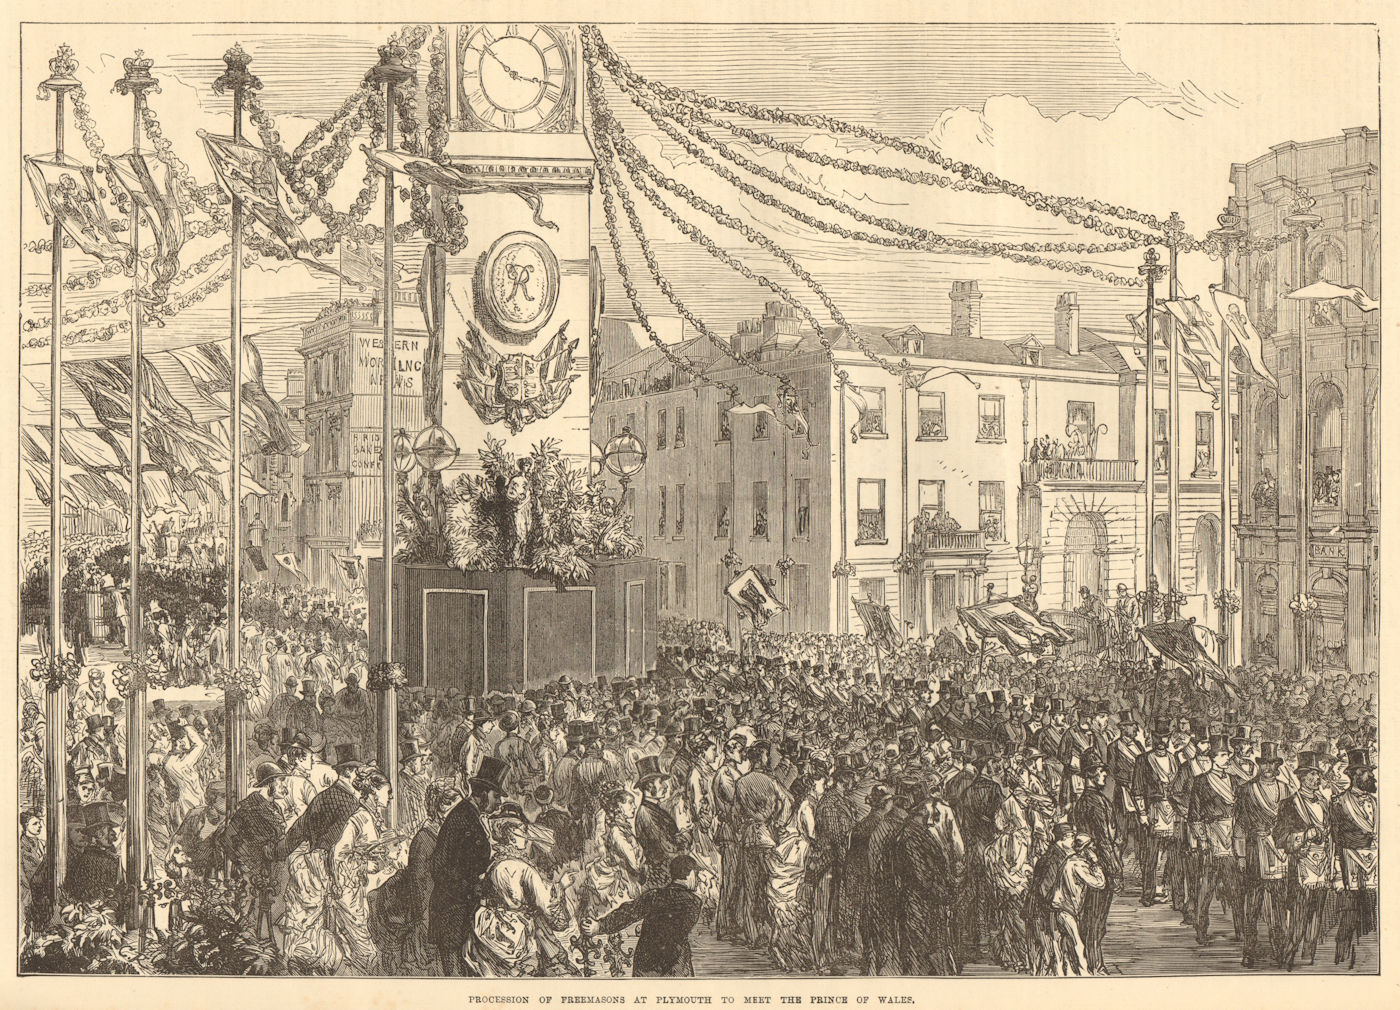 Associate Product Procession of freemasons at Plymouth to meet Prince of Wales (Edward VII) 1874